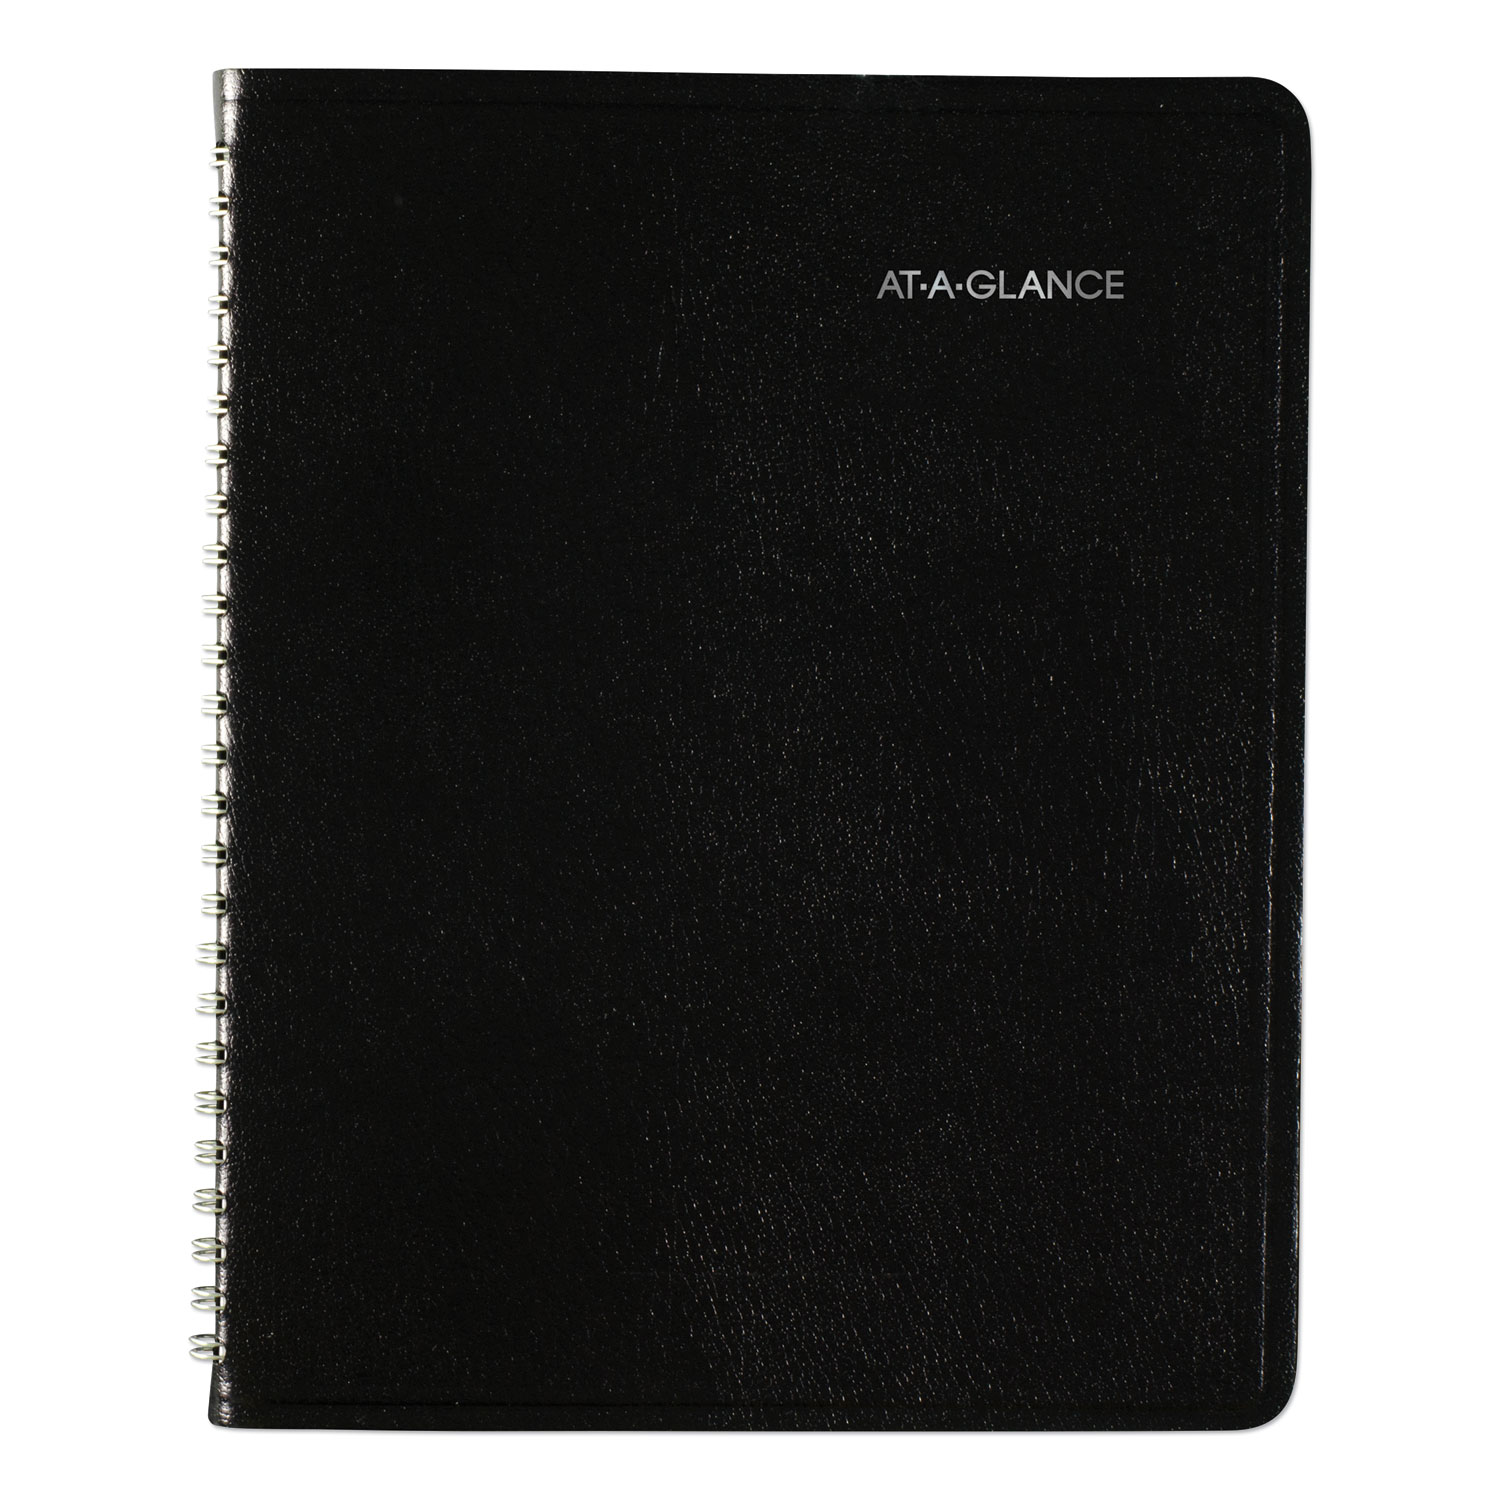  AT-A-GLANCE G535-00 Open-Schedule Weekly Appointment Book, 8 3/4 x 6 7/8, Black, 2020 (AAGG53500) 